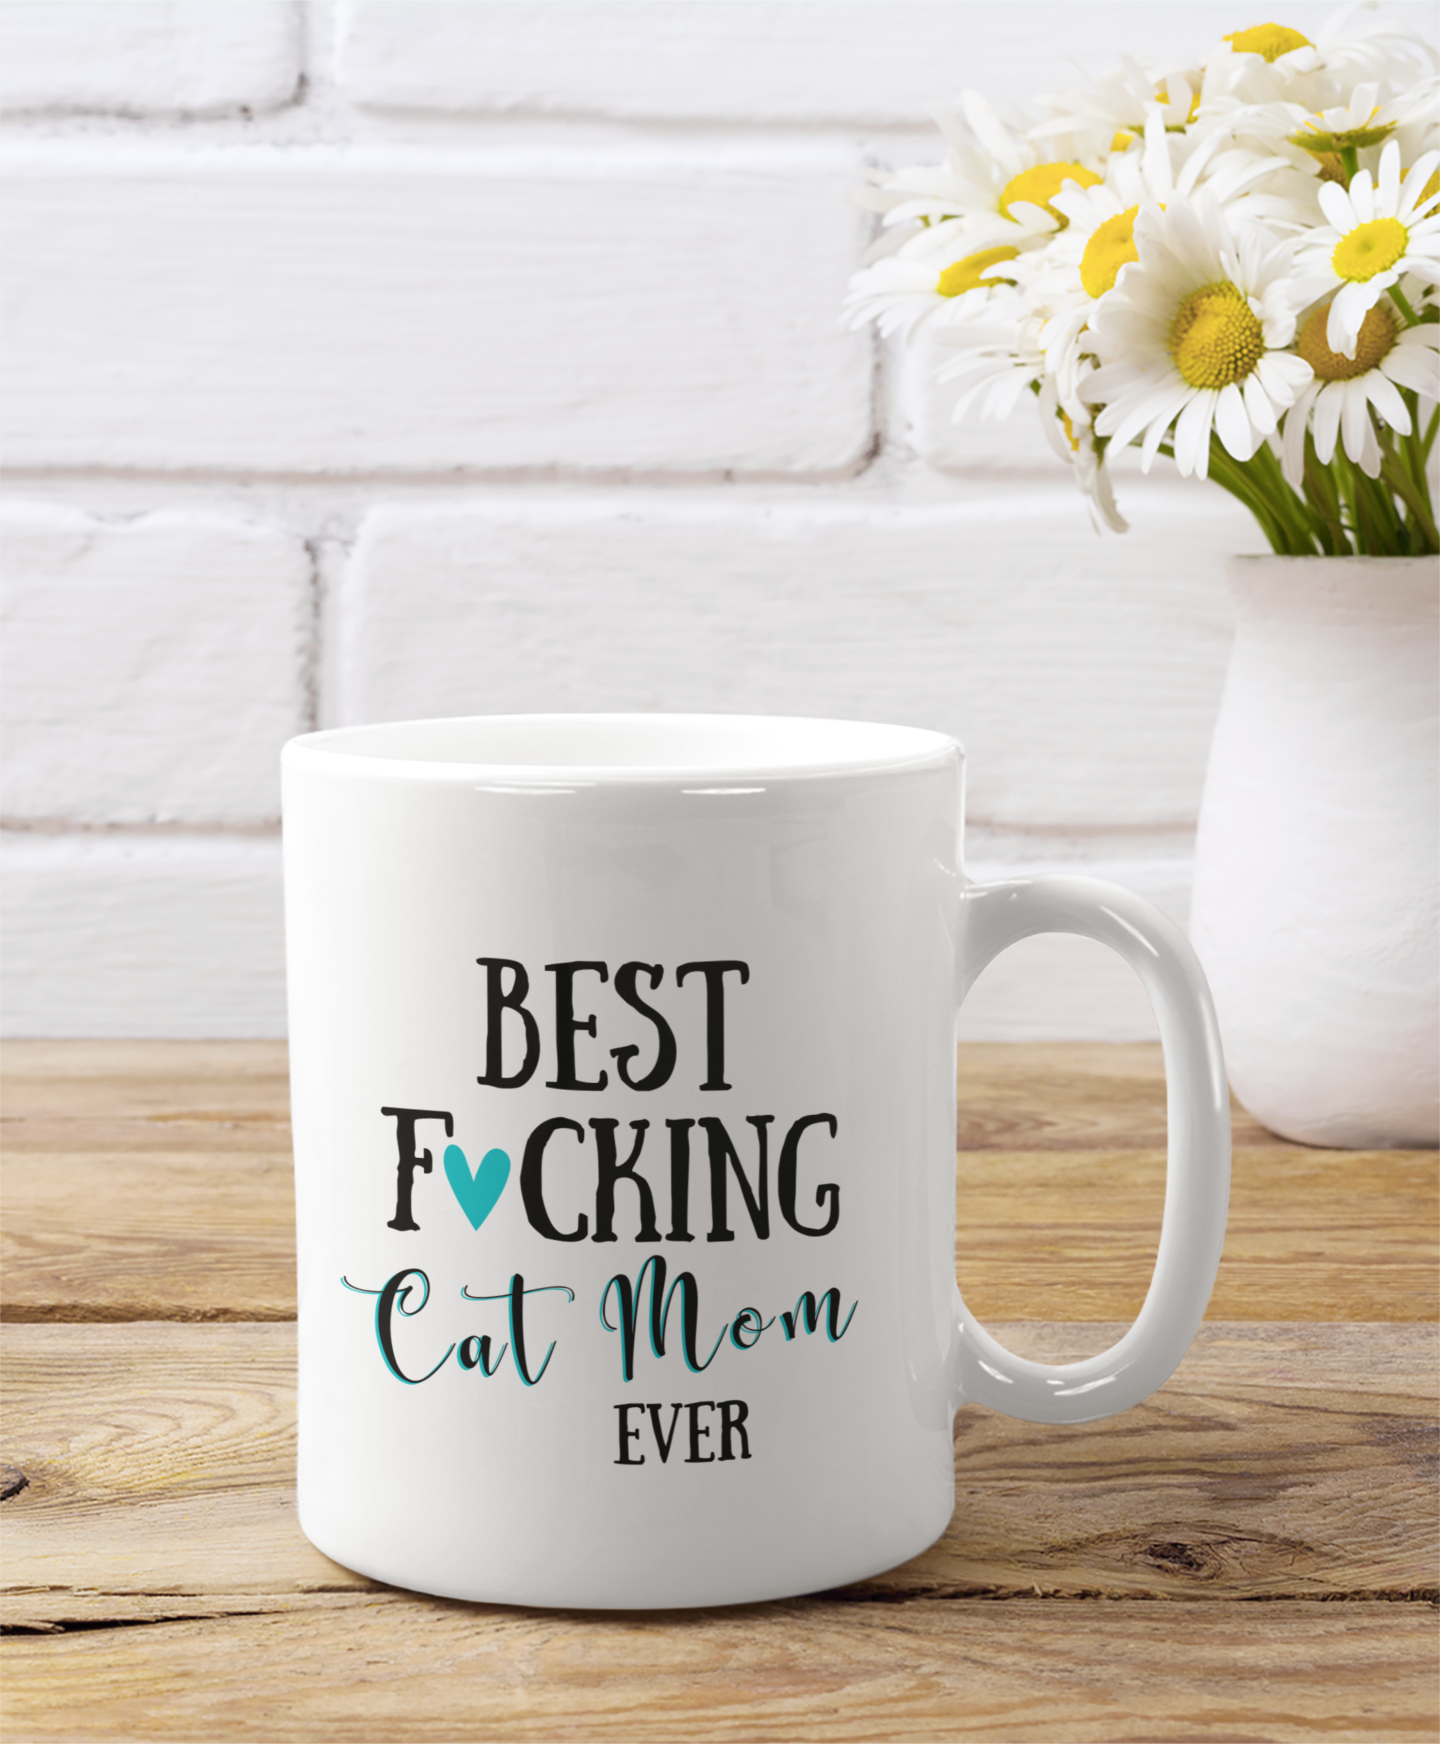 Funny Mom Gift Best Fucking Mom Ever Mug Mother's Day Gift Coffee